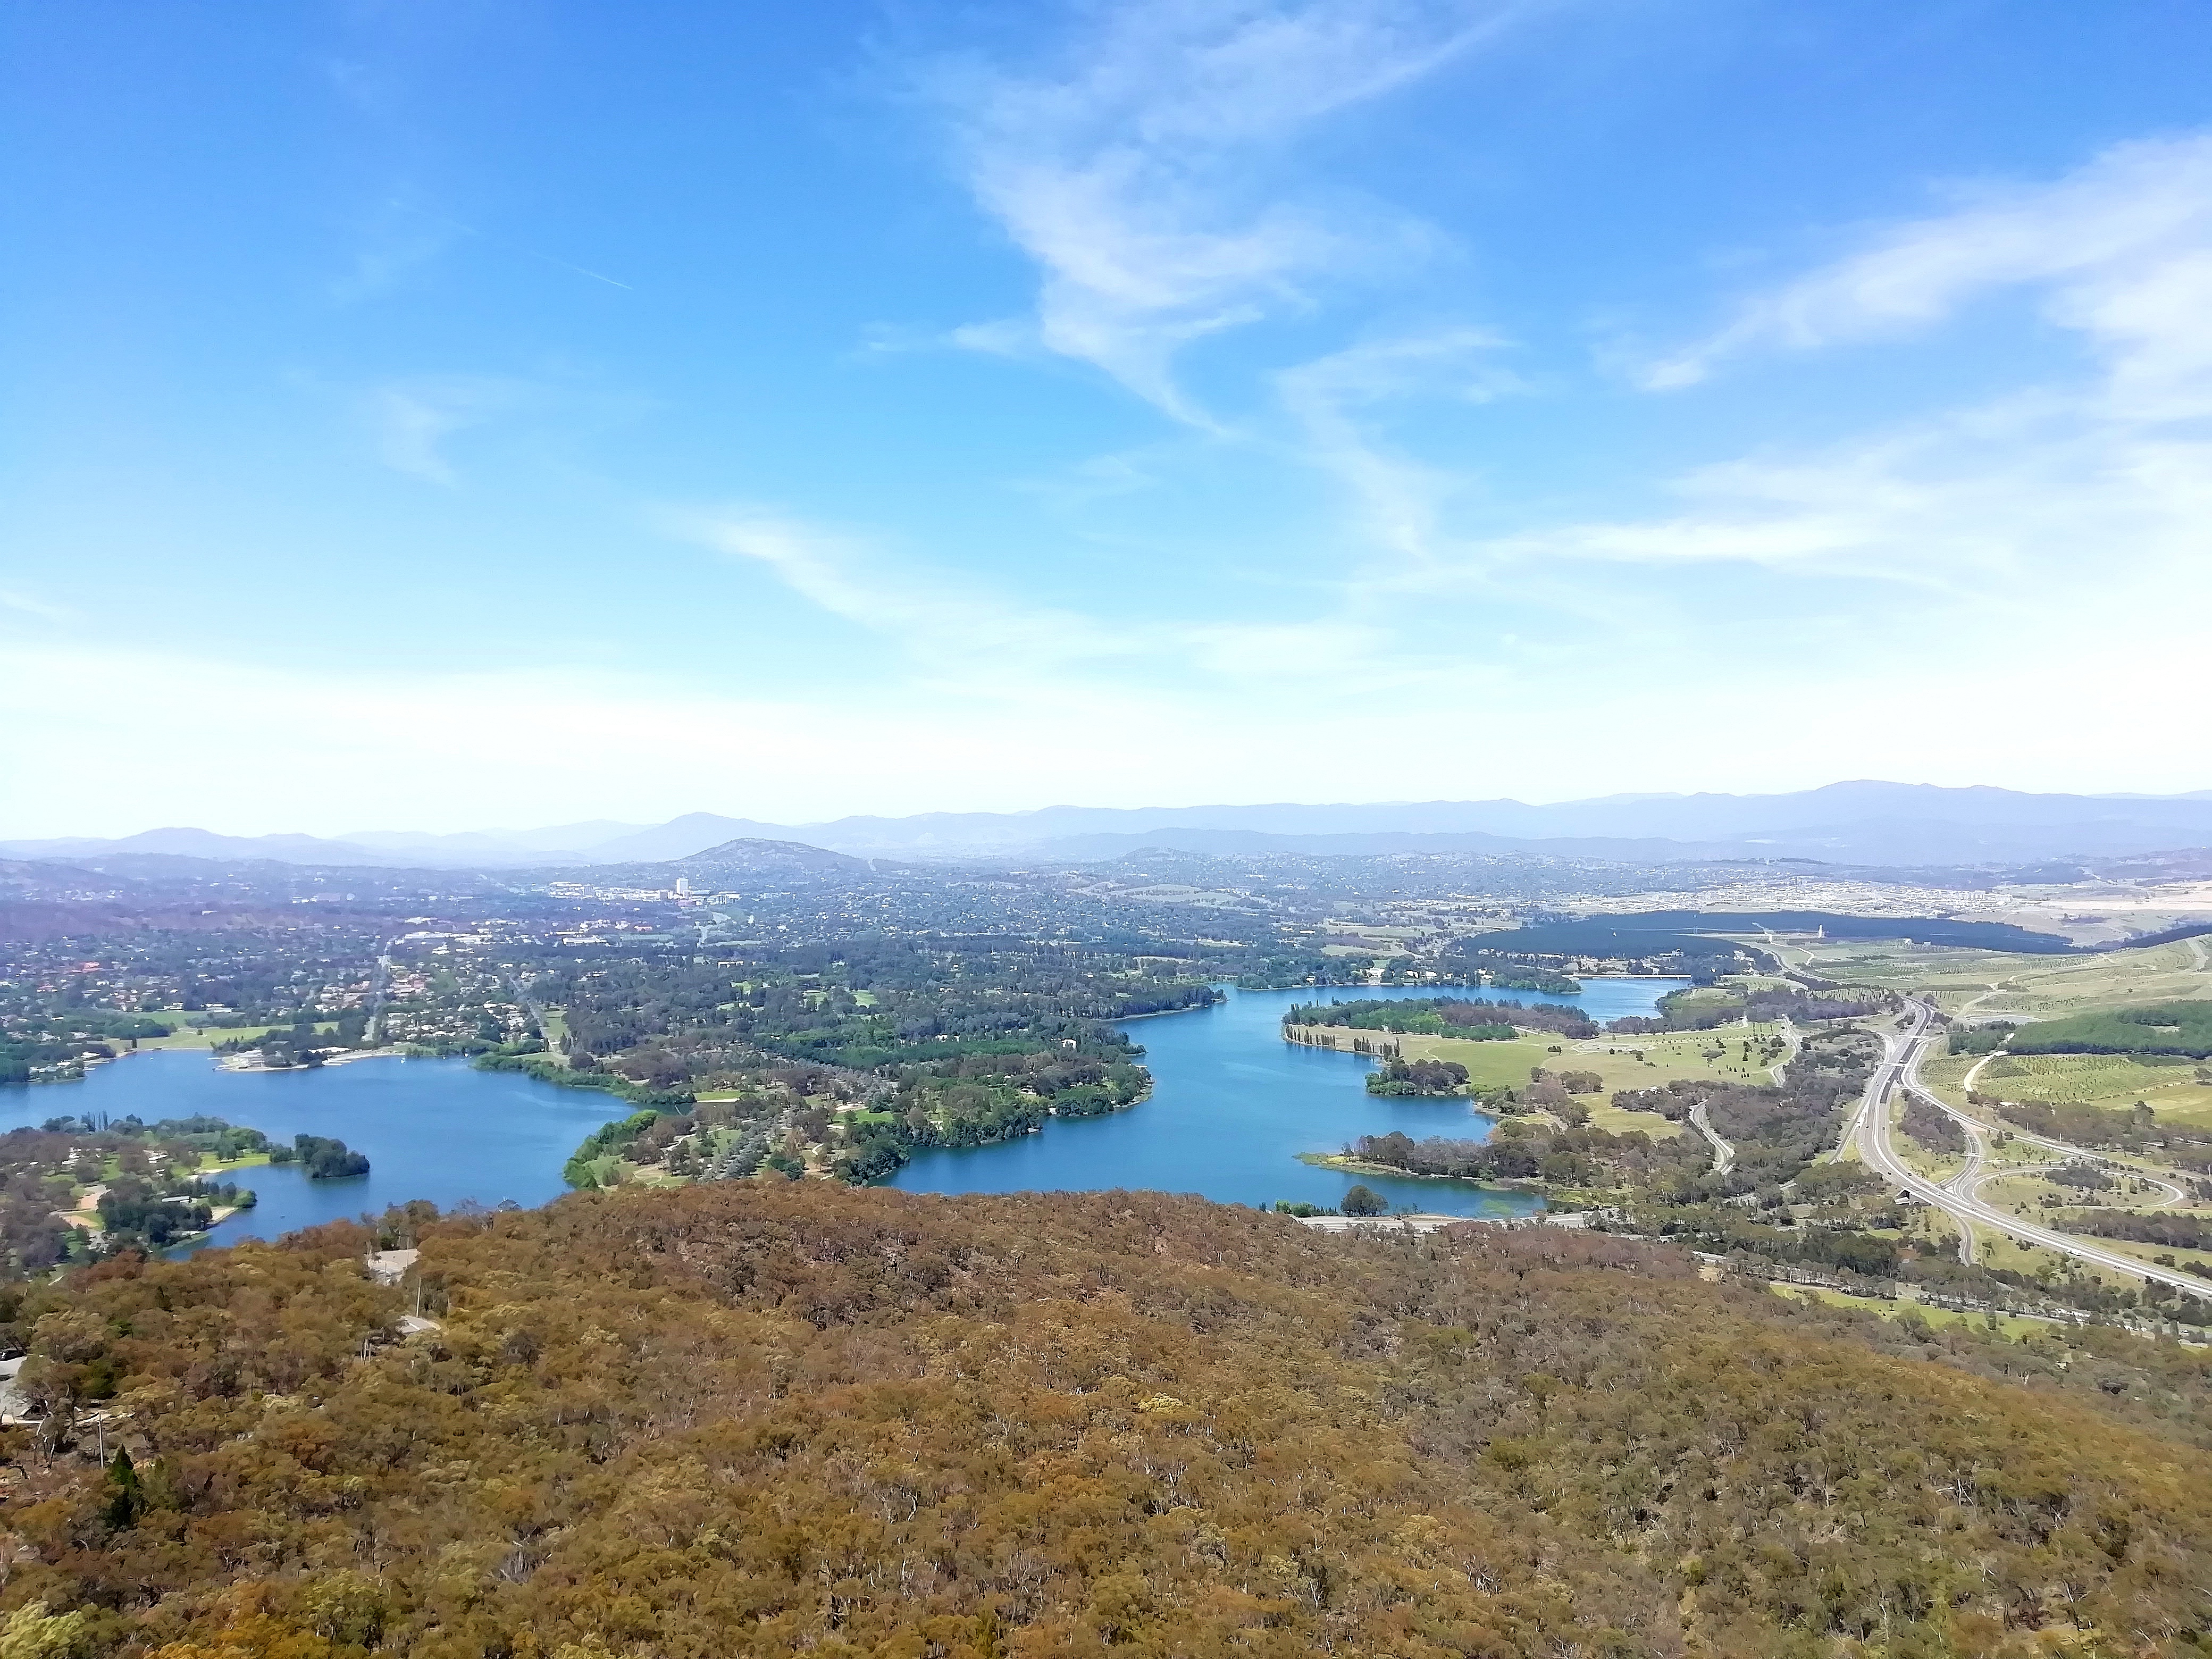 View of Canberra from the Telstra Tower